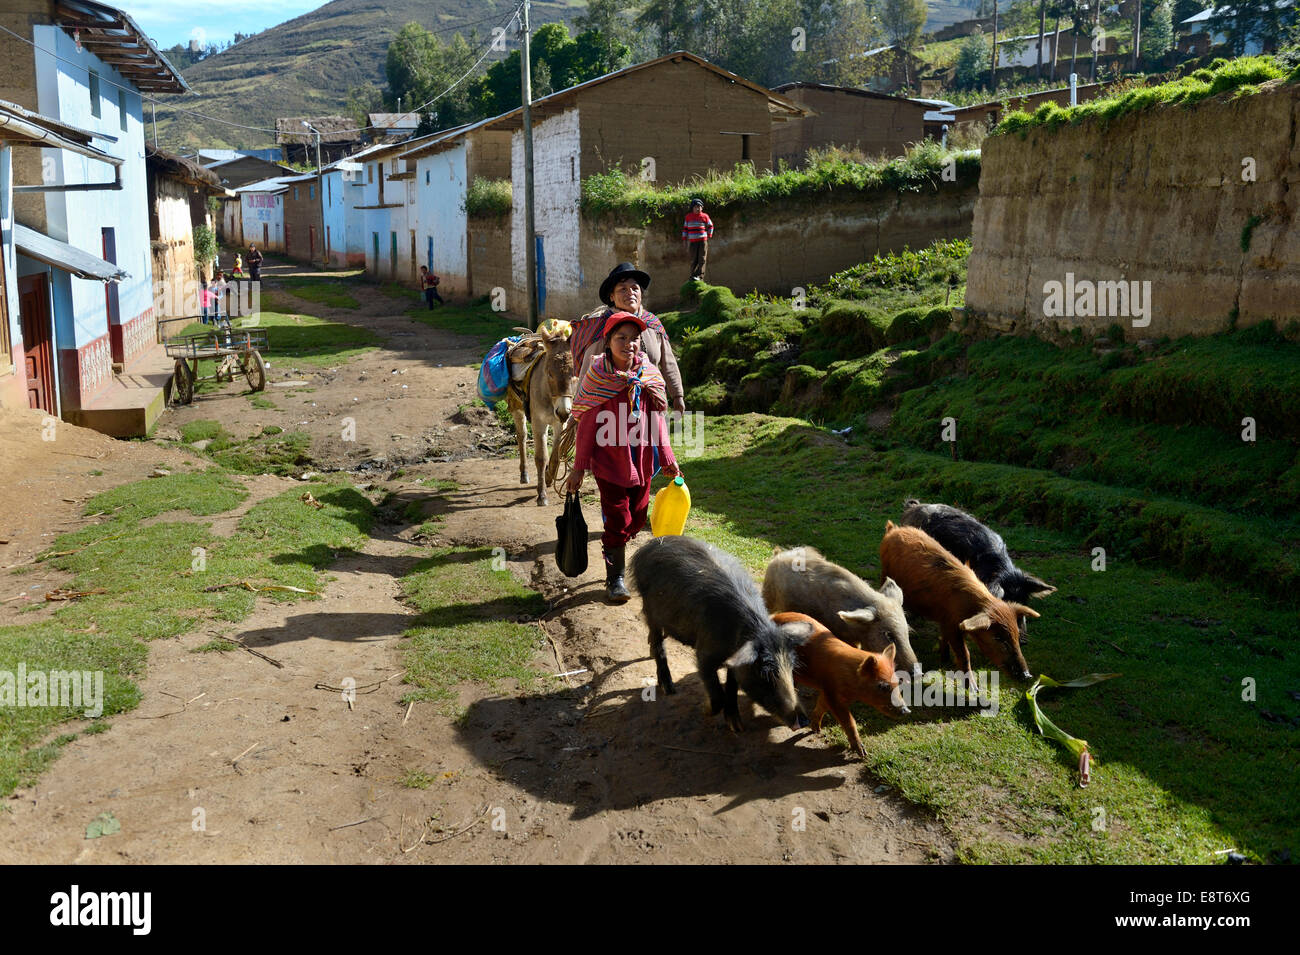 Two women driving pigs along a street of a small town, Chuquis, Huanuco Province, Peru Stock Photo